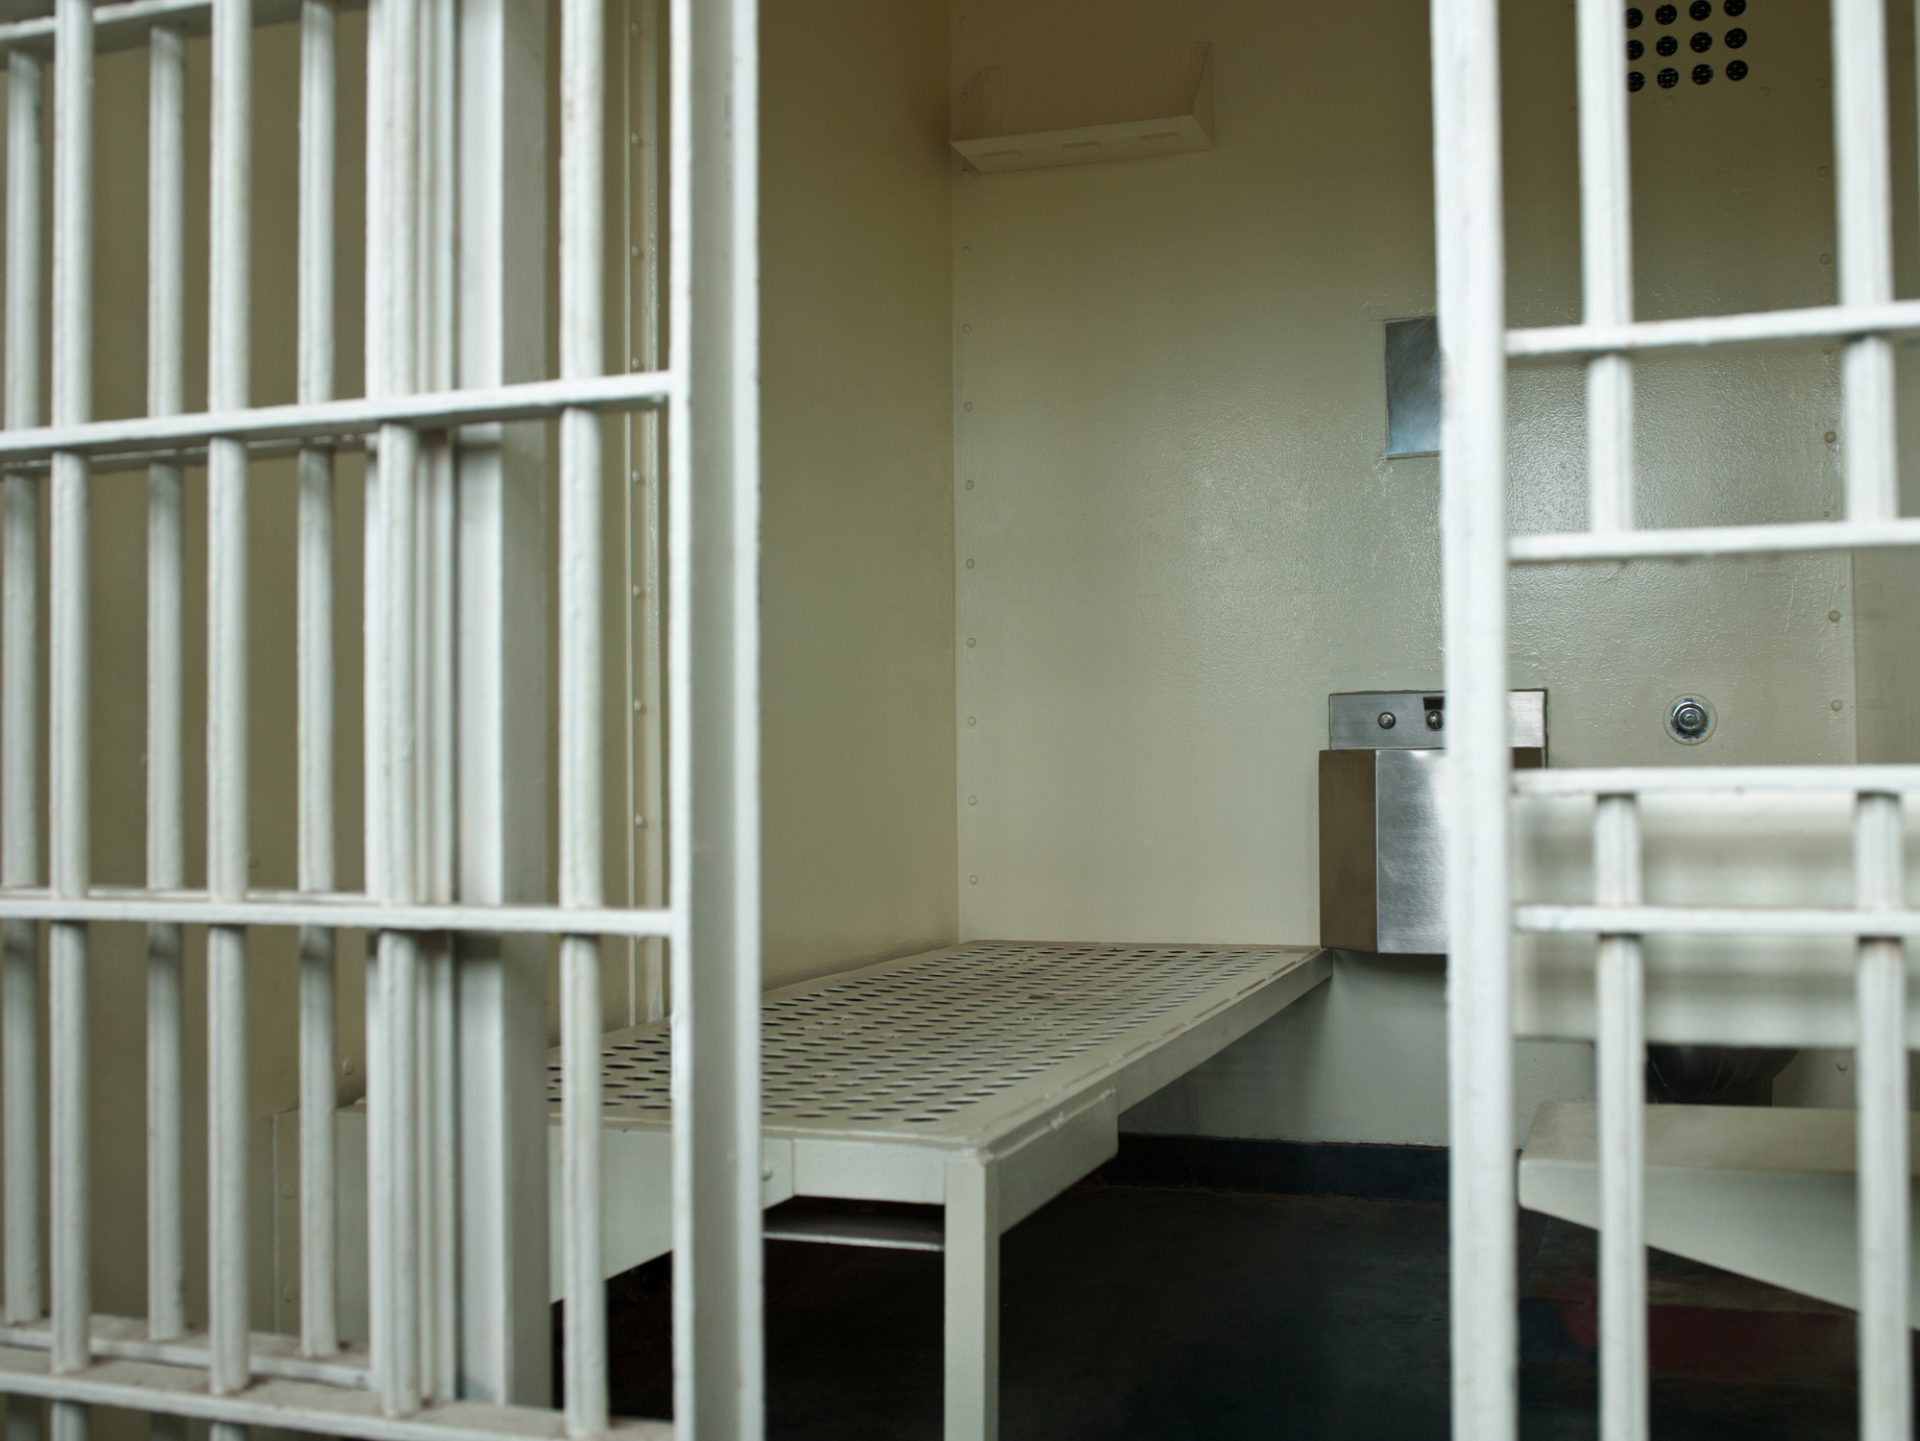 Lawsuit Alleges Alabama Inmate ‘Literally Baked To Death’ In Overheated, 130 Degree Prison Cell